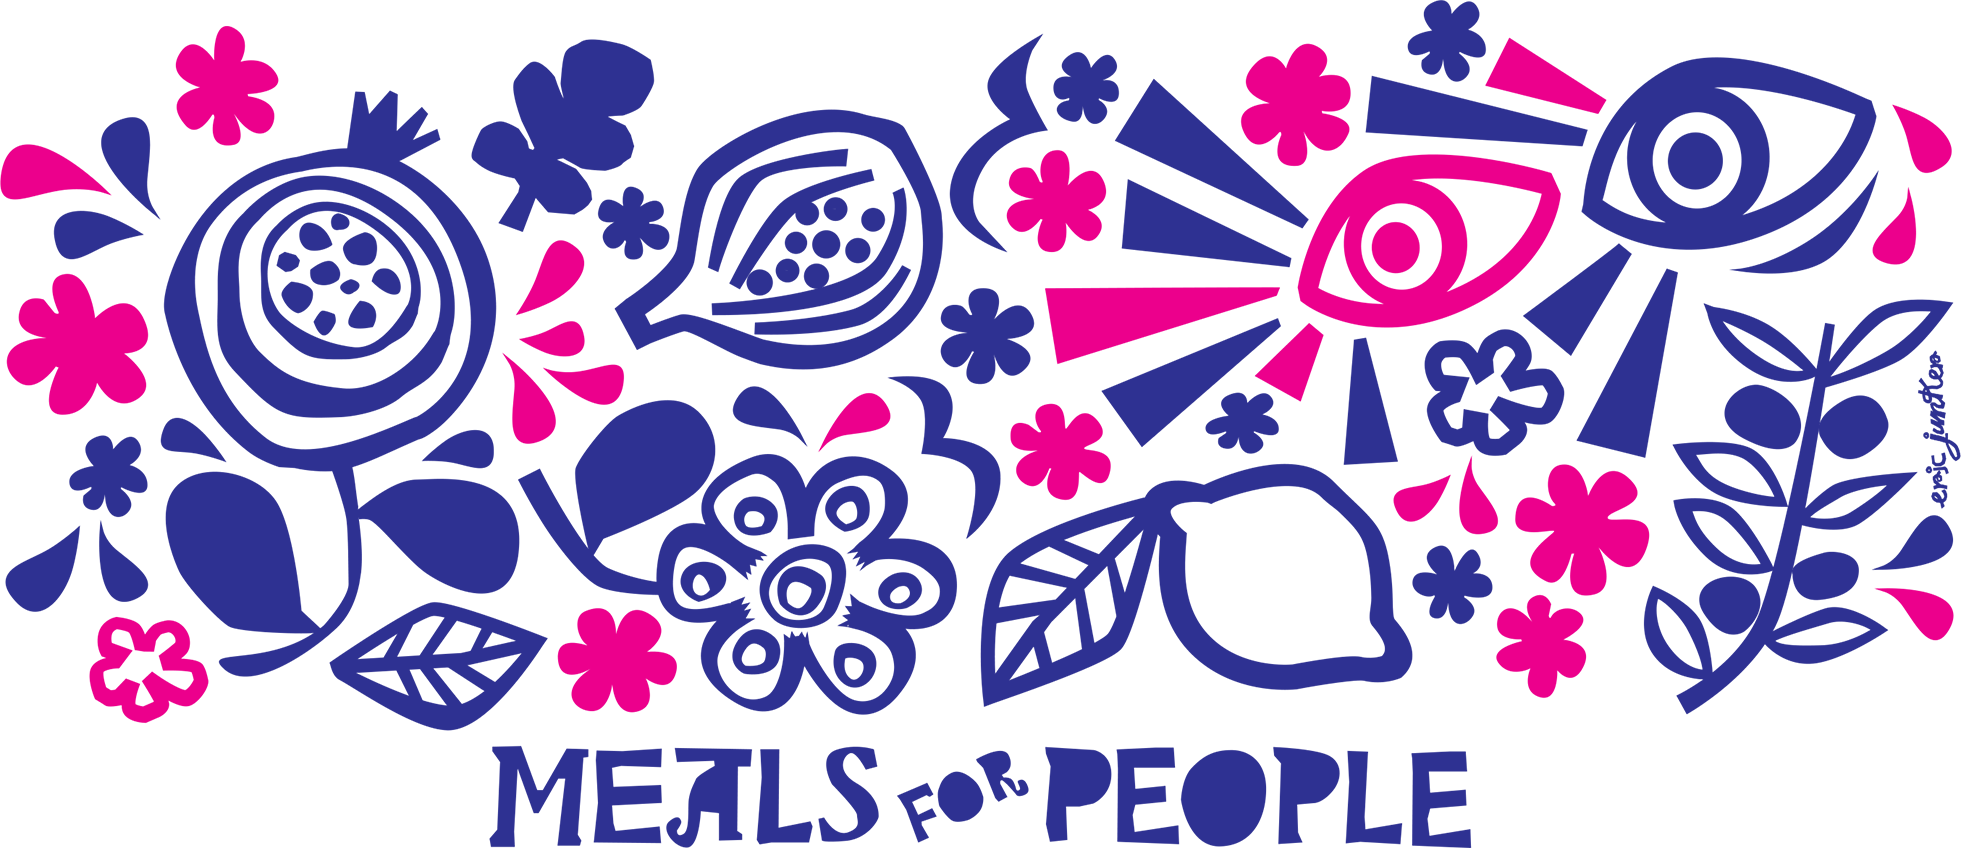 Meals for People Art